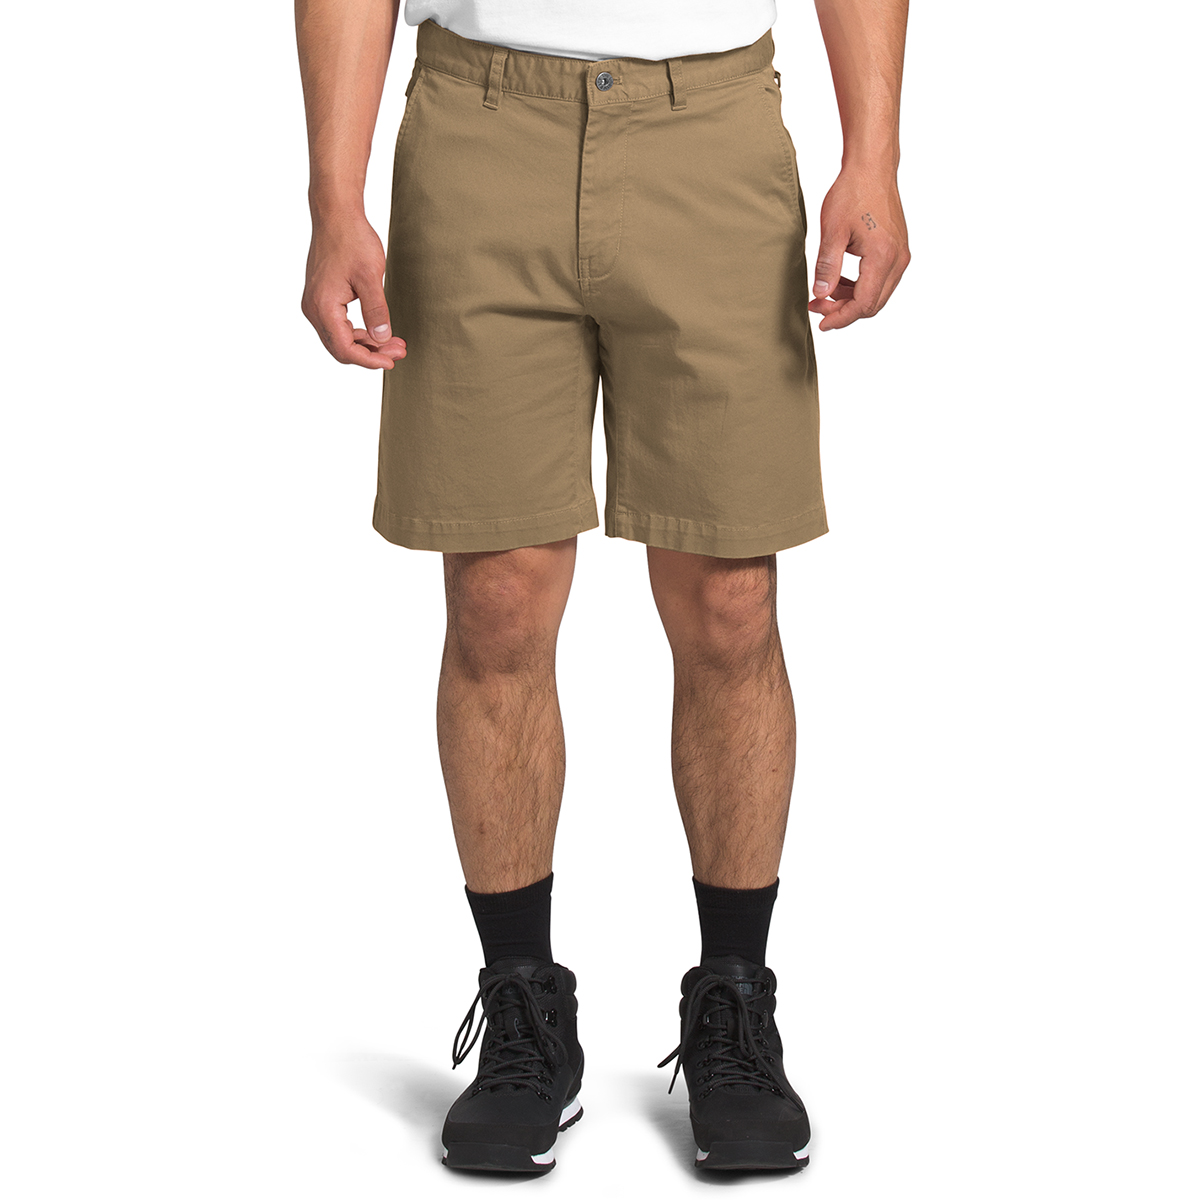 The North Face Men's 9" Motion Shorts - Size 30